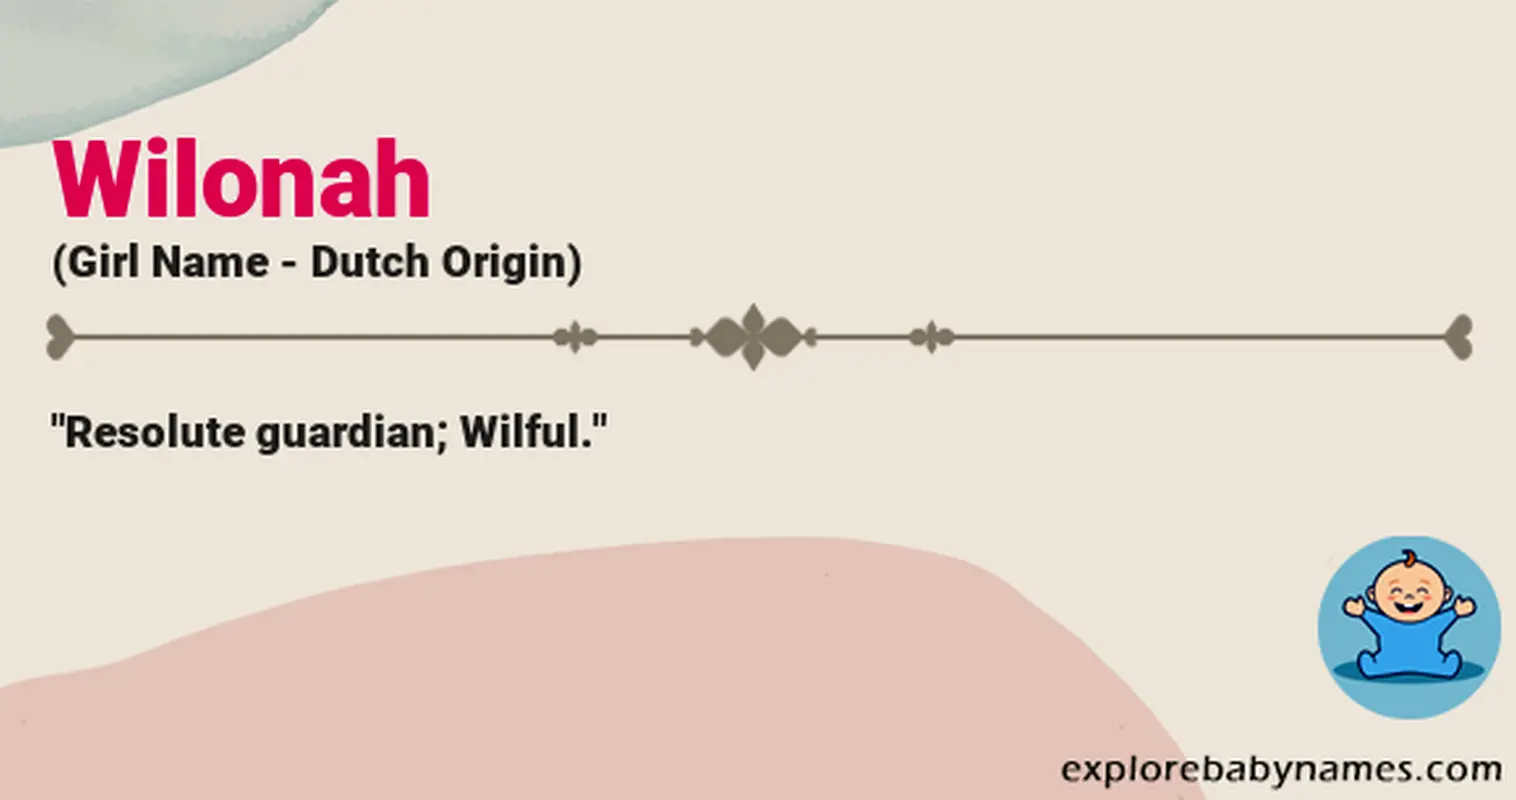 Meaning of Wilonah